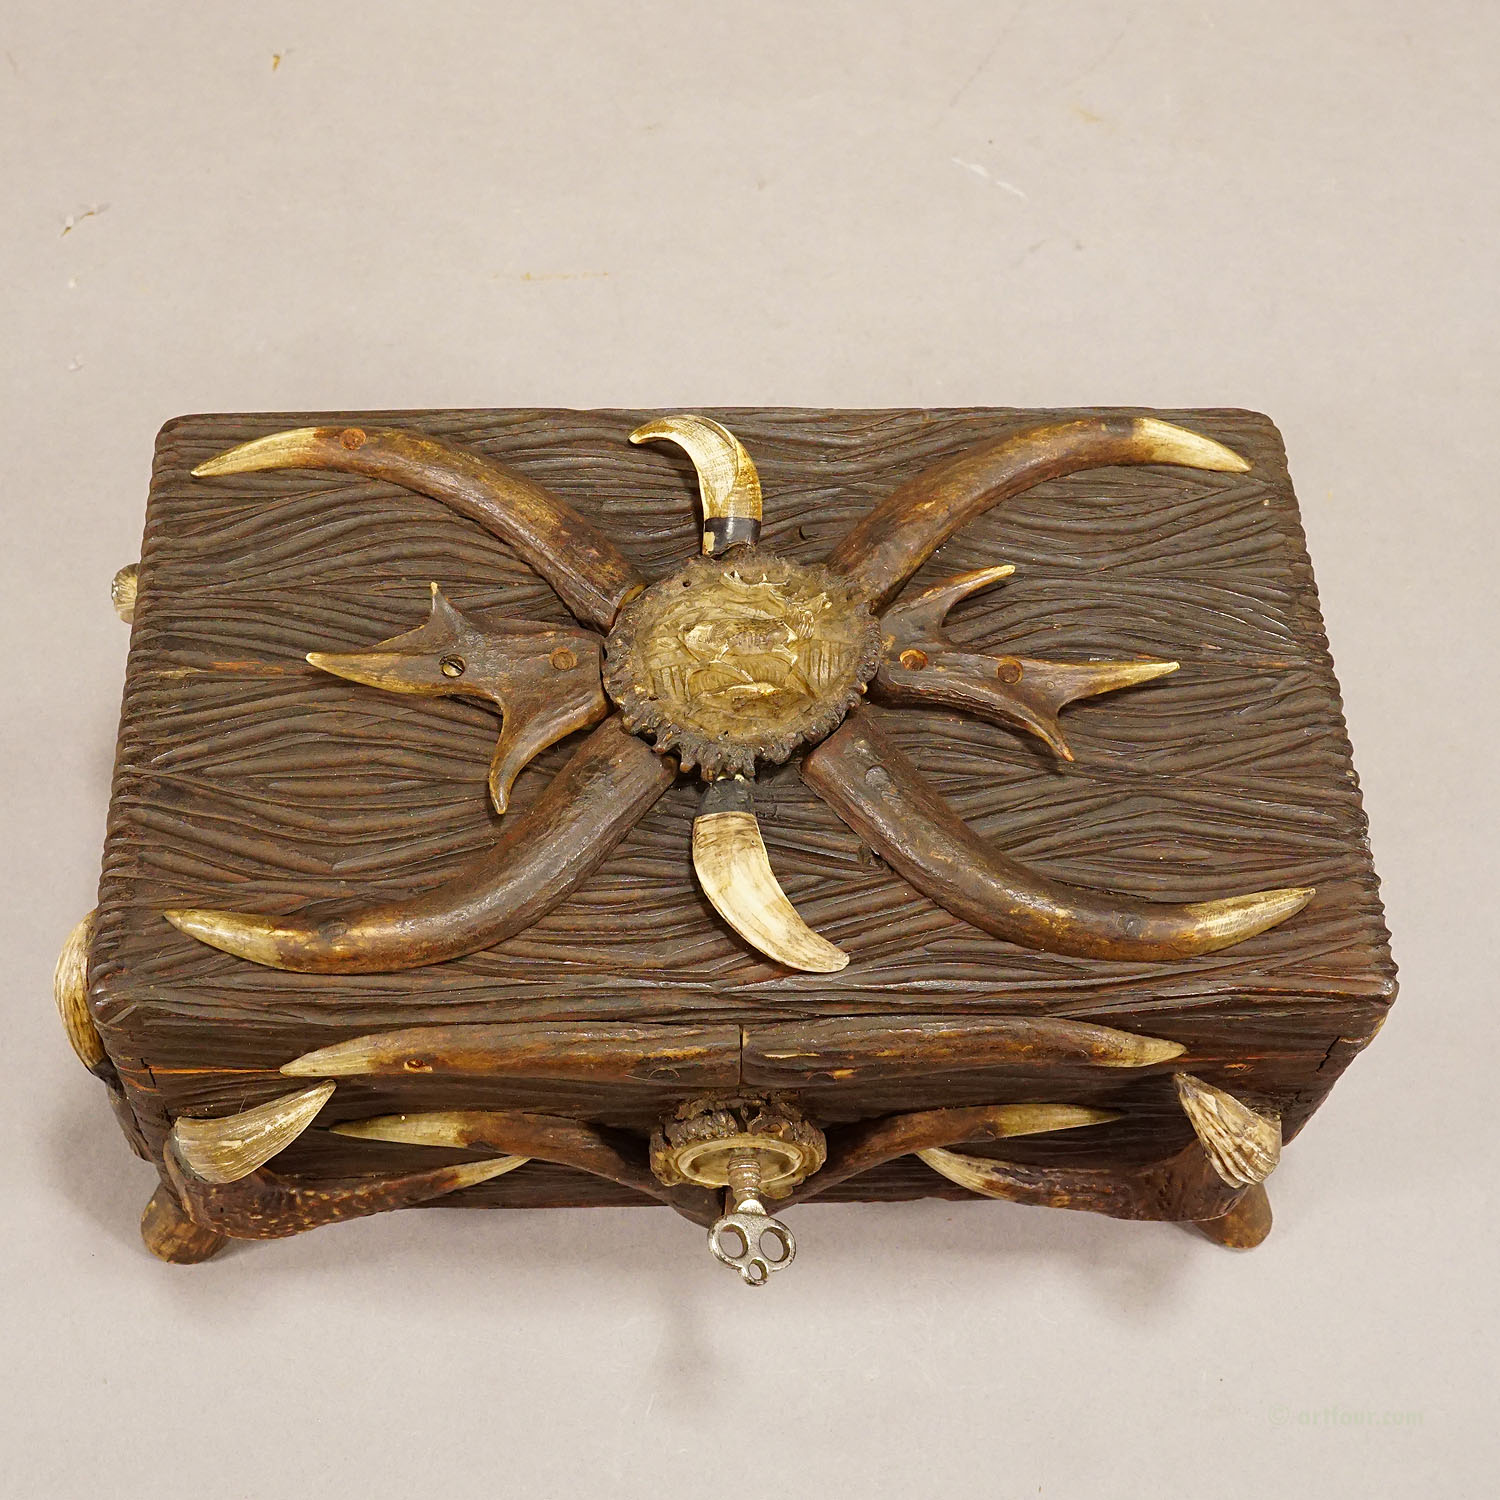 Black Forest Wooden Casket with Antlers Decoration circa 1900s